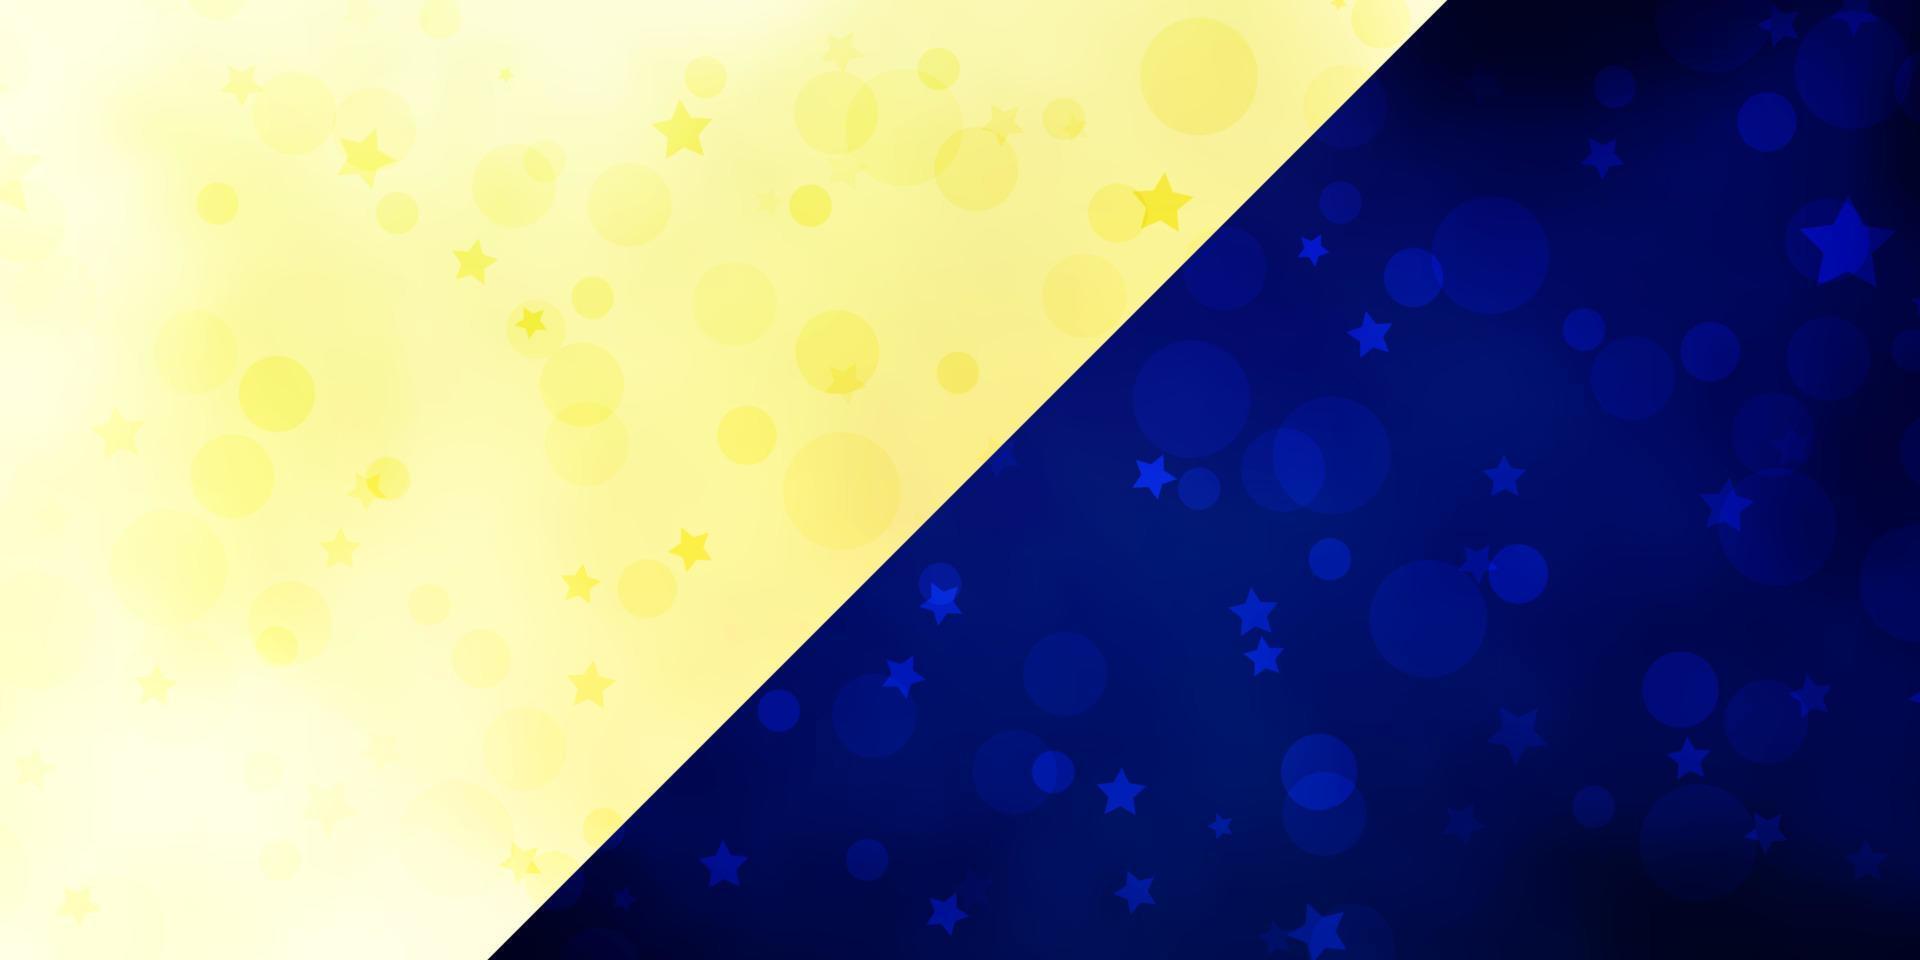 Vector layout with circles, stars.